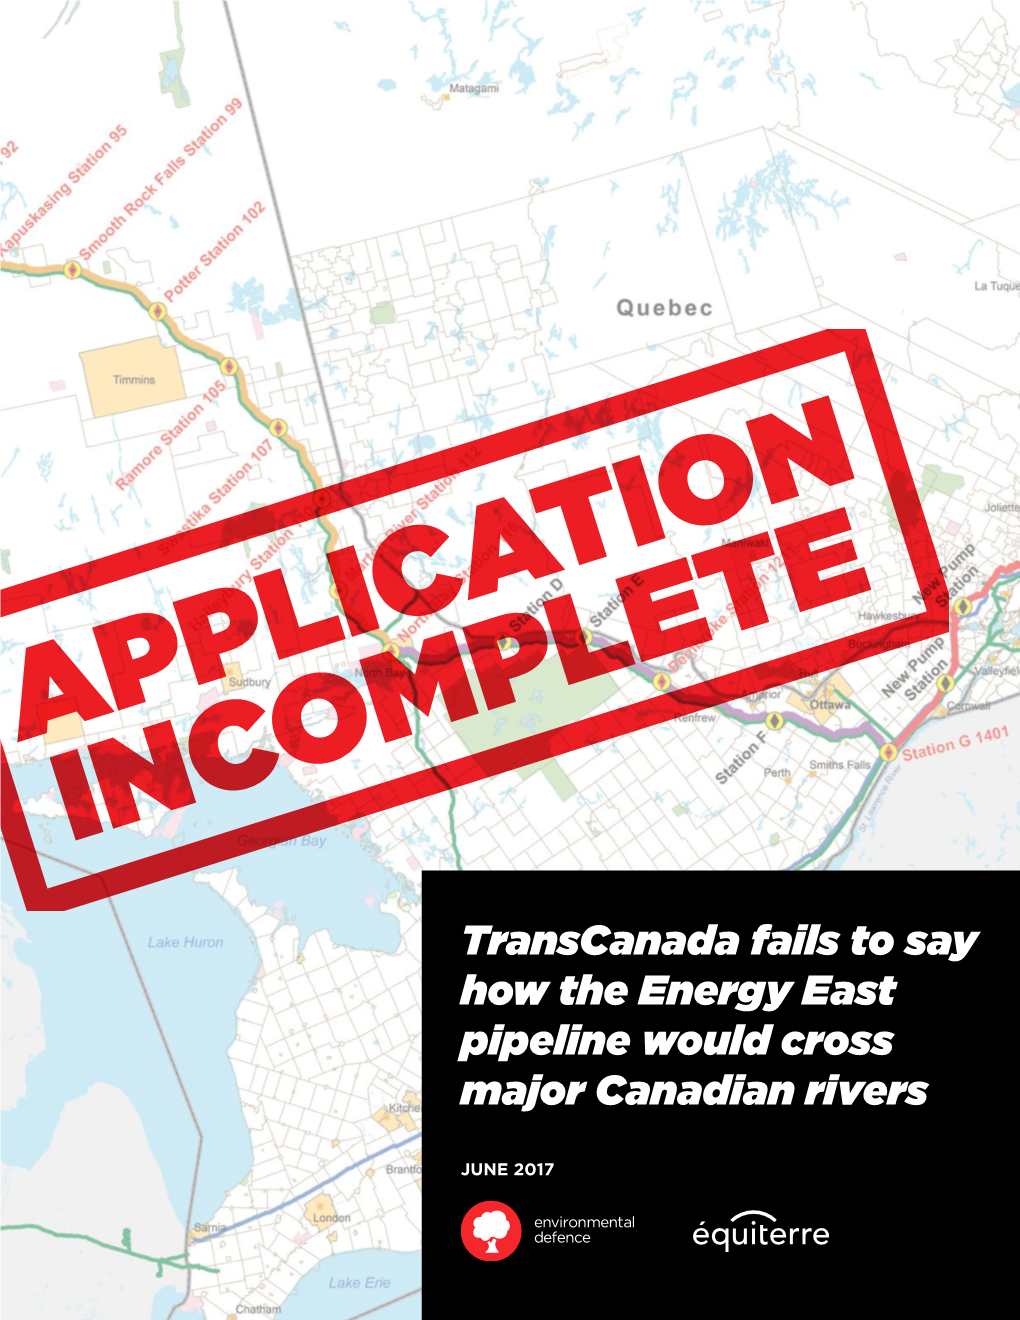 Transcanada Fails to Say How the Energy East Pipeline Would Cross Major Canadian Rivers